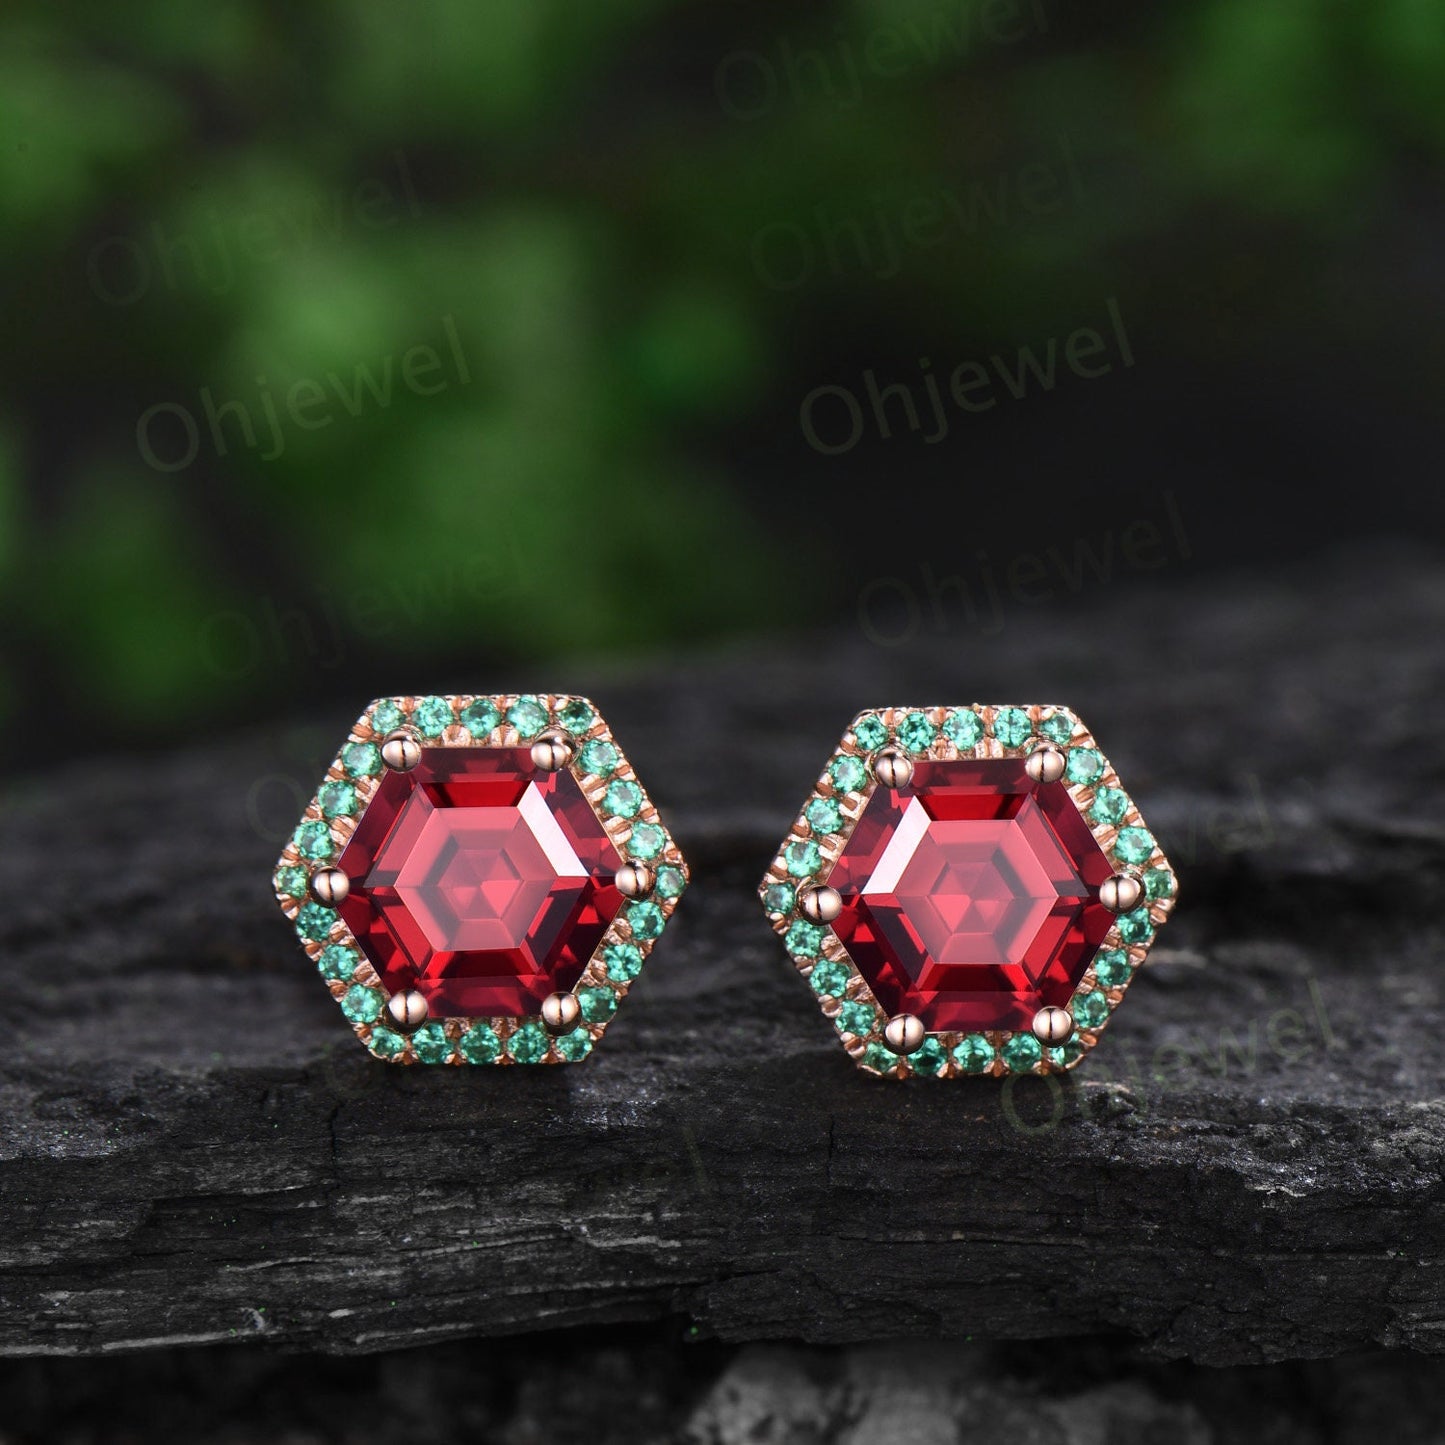 Vintage hexagon cut red ruby earrings solid 14k rose gold unique 6 prong halo emerald stud earrings women gemstone wedding anniversary gift